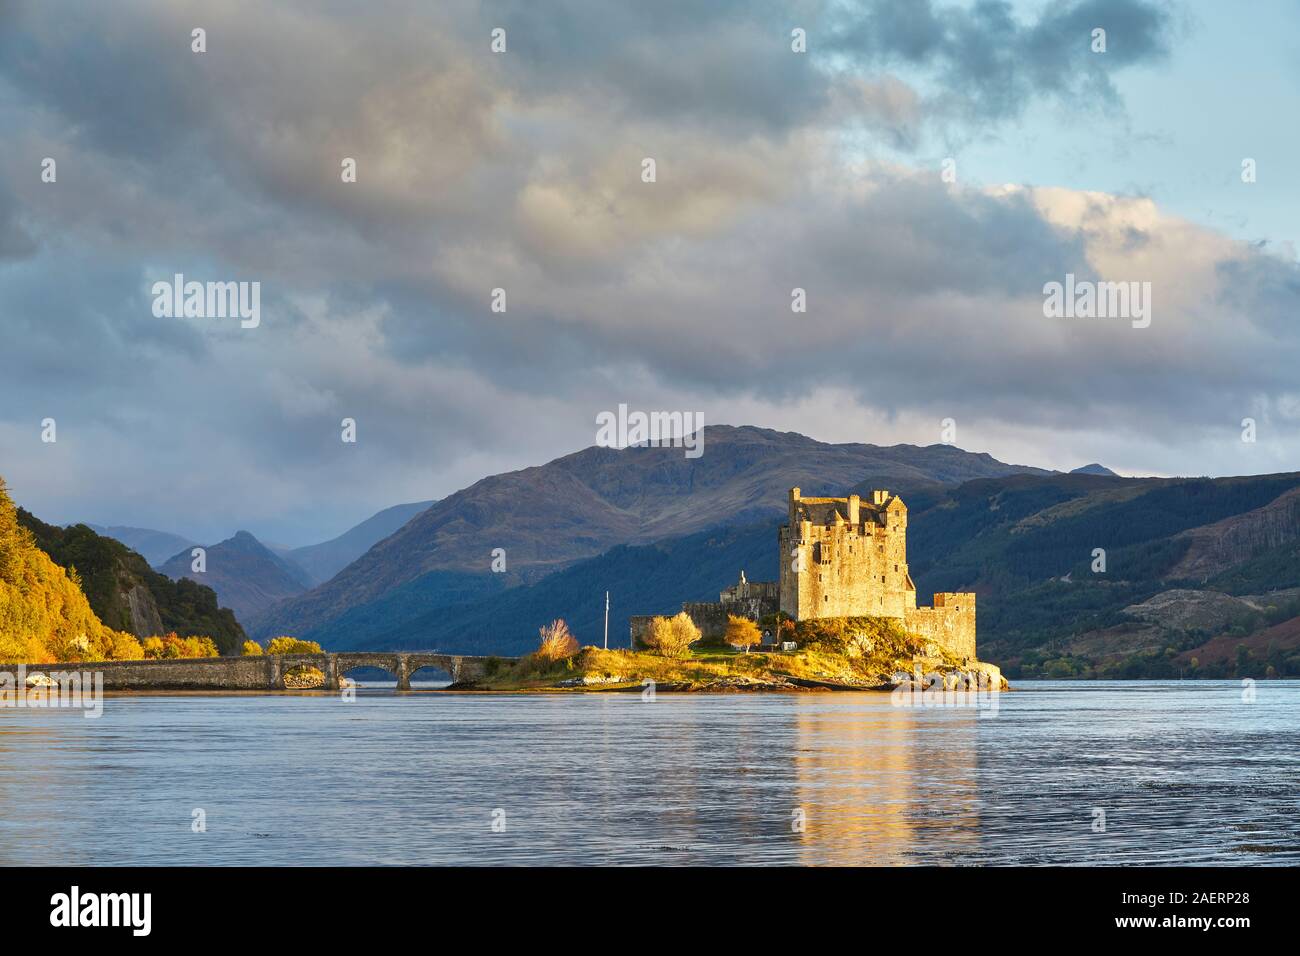 The spectacular scene of the castle on Eileen Donan island being illuminated by the soft light from the lowering sun on an October evening Stock Photo